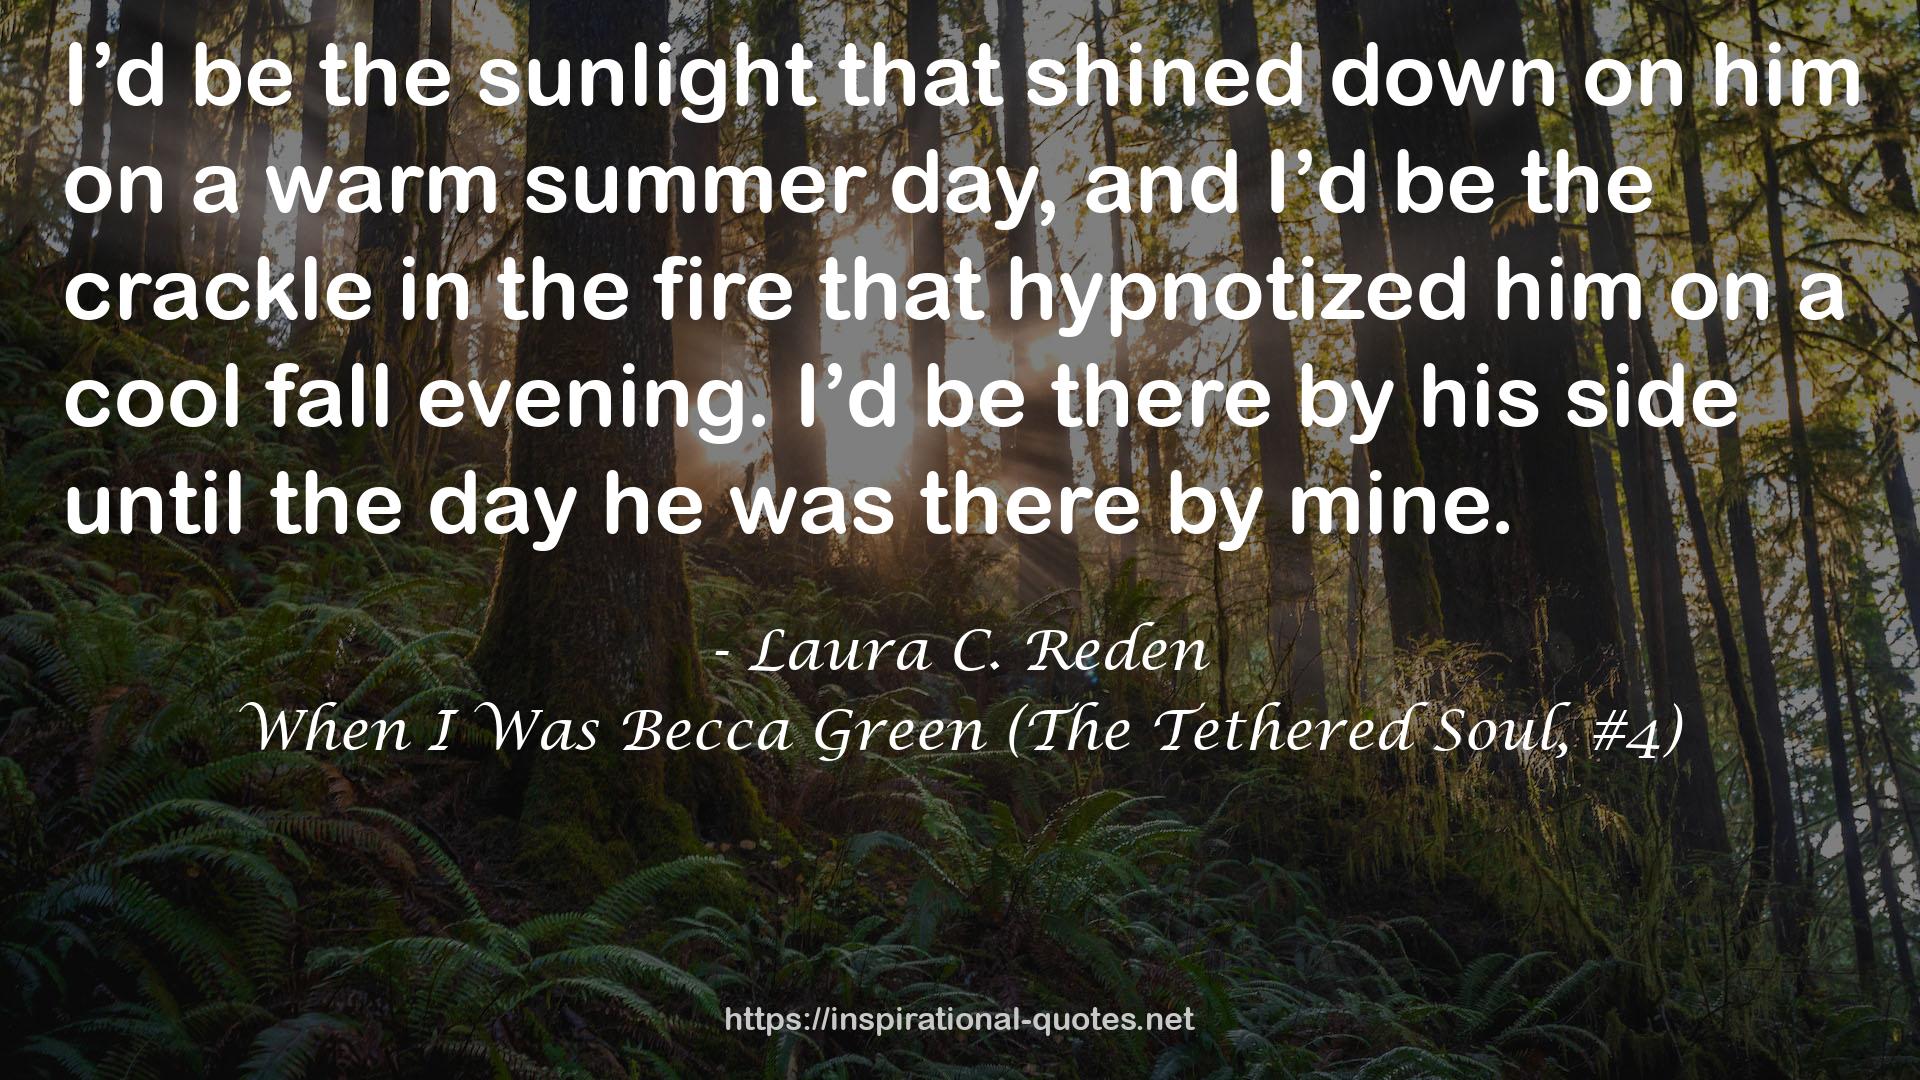 When I Was Becca Green (The Tethered Soul, #4) QUOTES